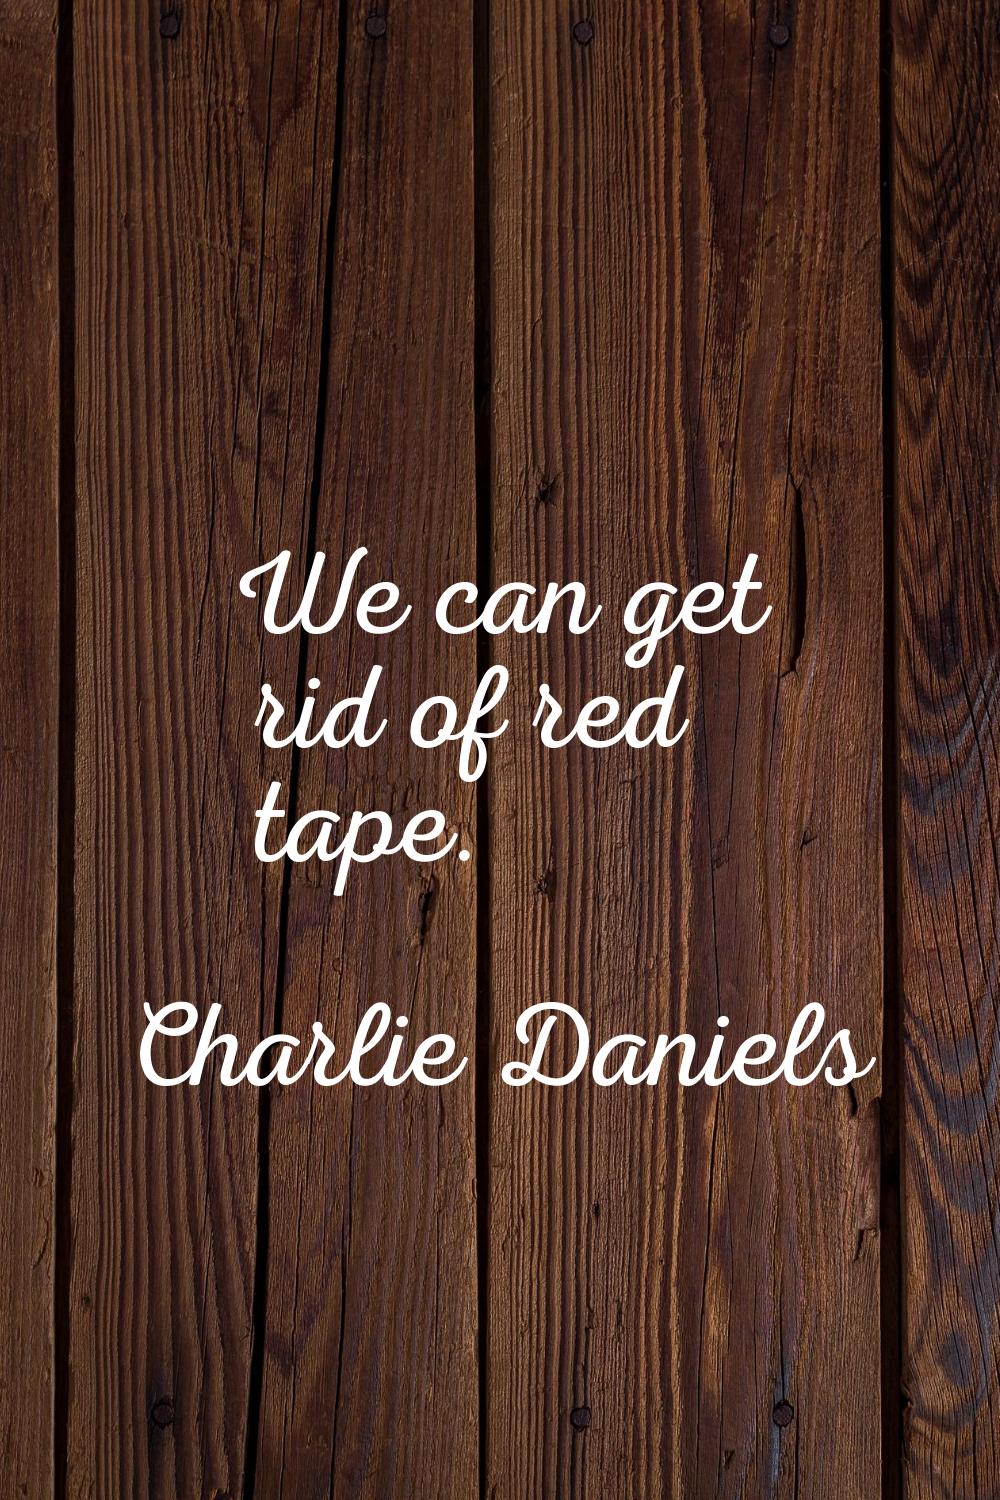 We can get rid of red tape.